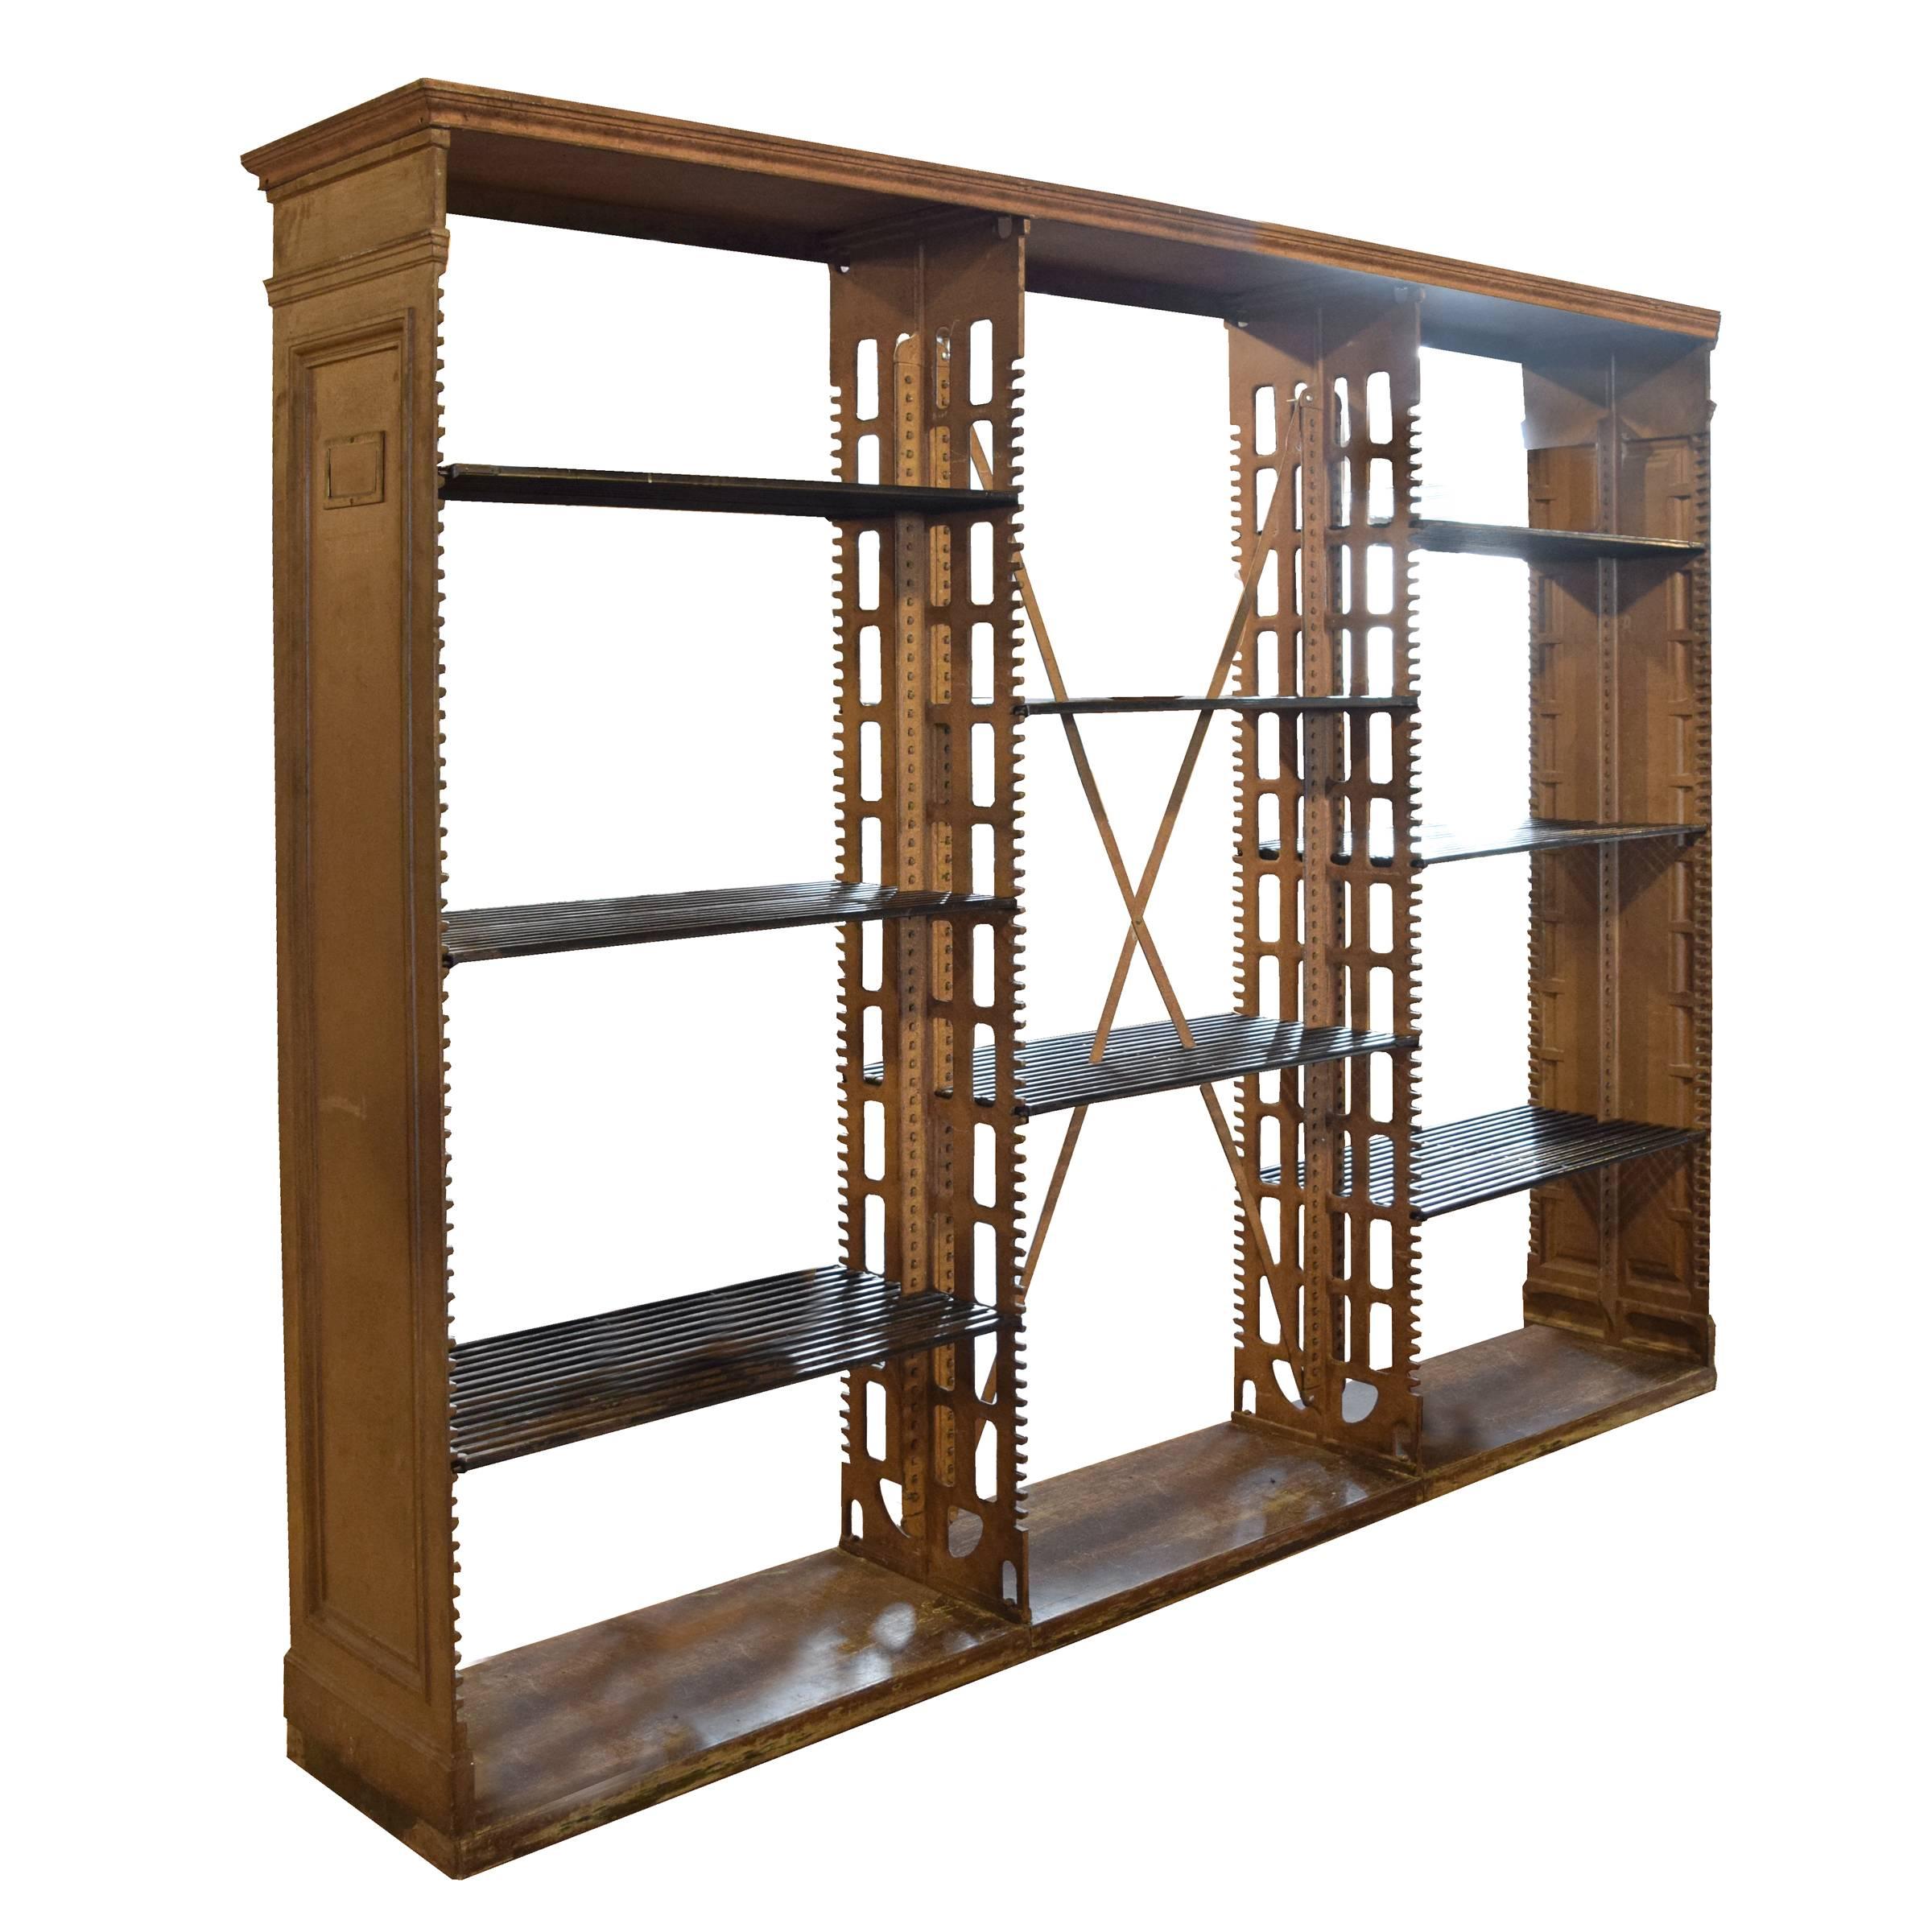 Cast Iron Library Bookshelf by Snead and Co.